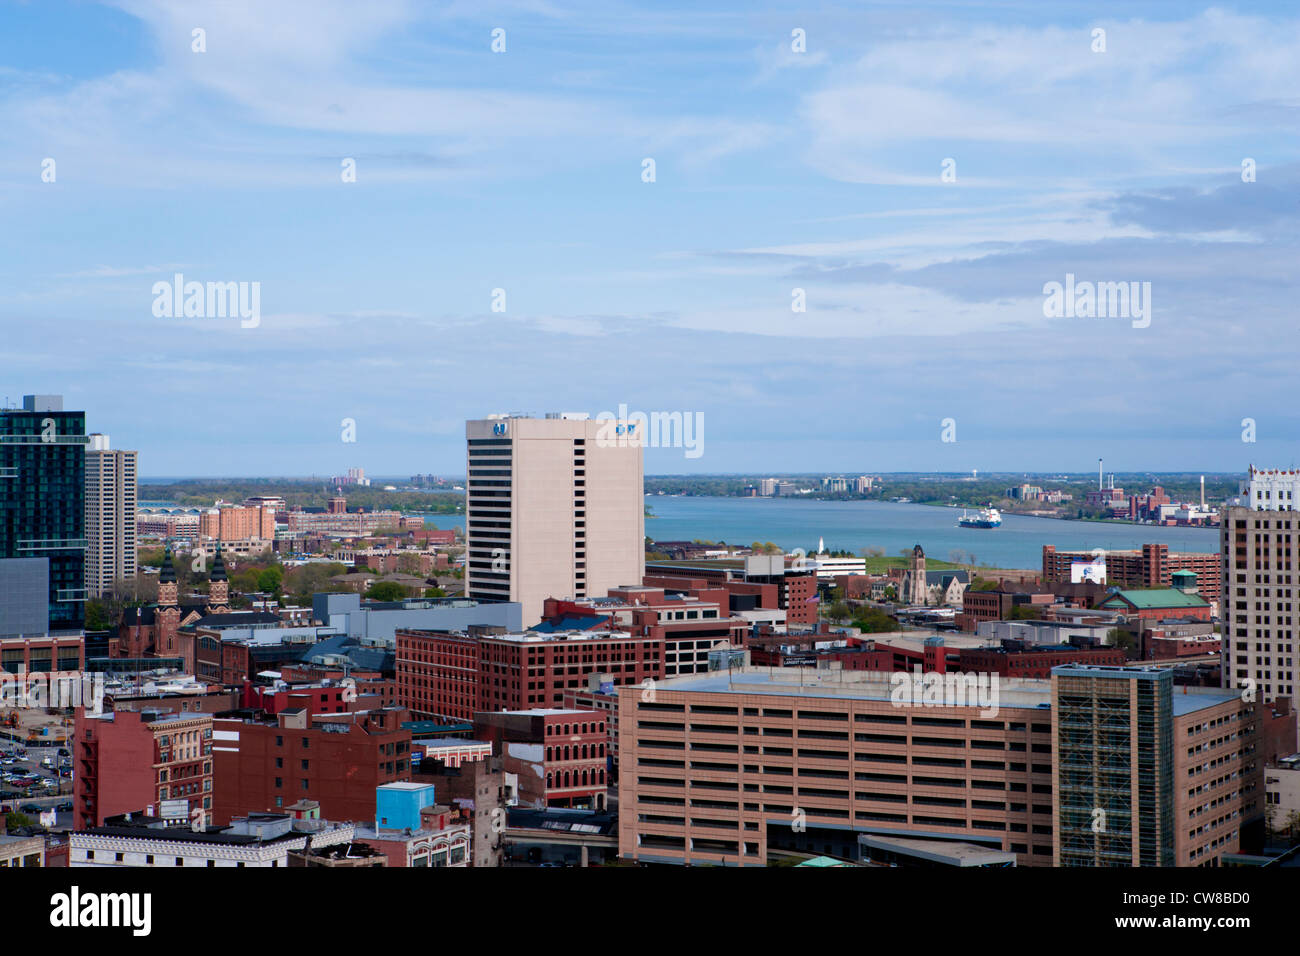 Detroit Michigan skyline looking towards the Detroit River which can be seen in the background a freighters heading upstream. Stock Photo